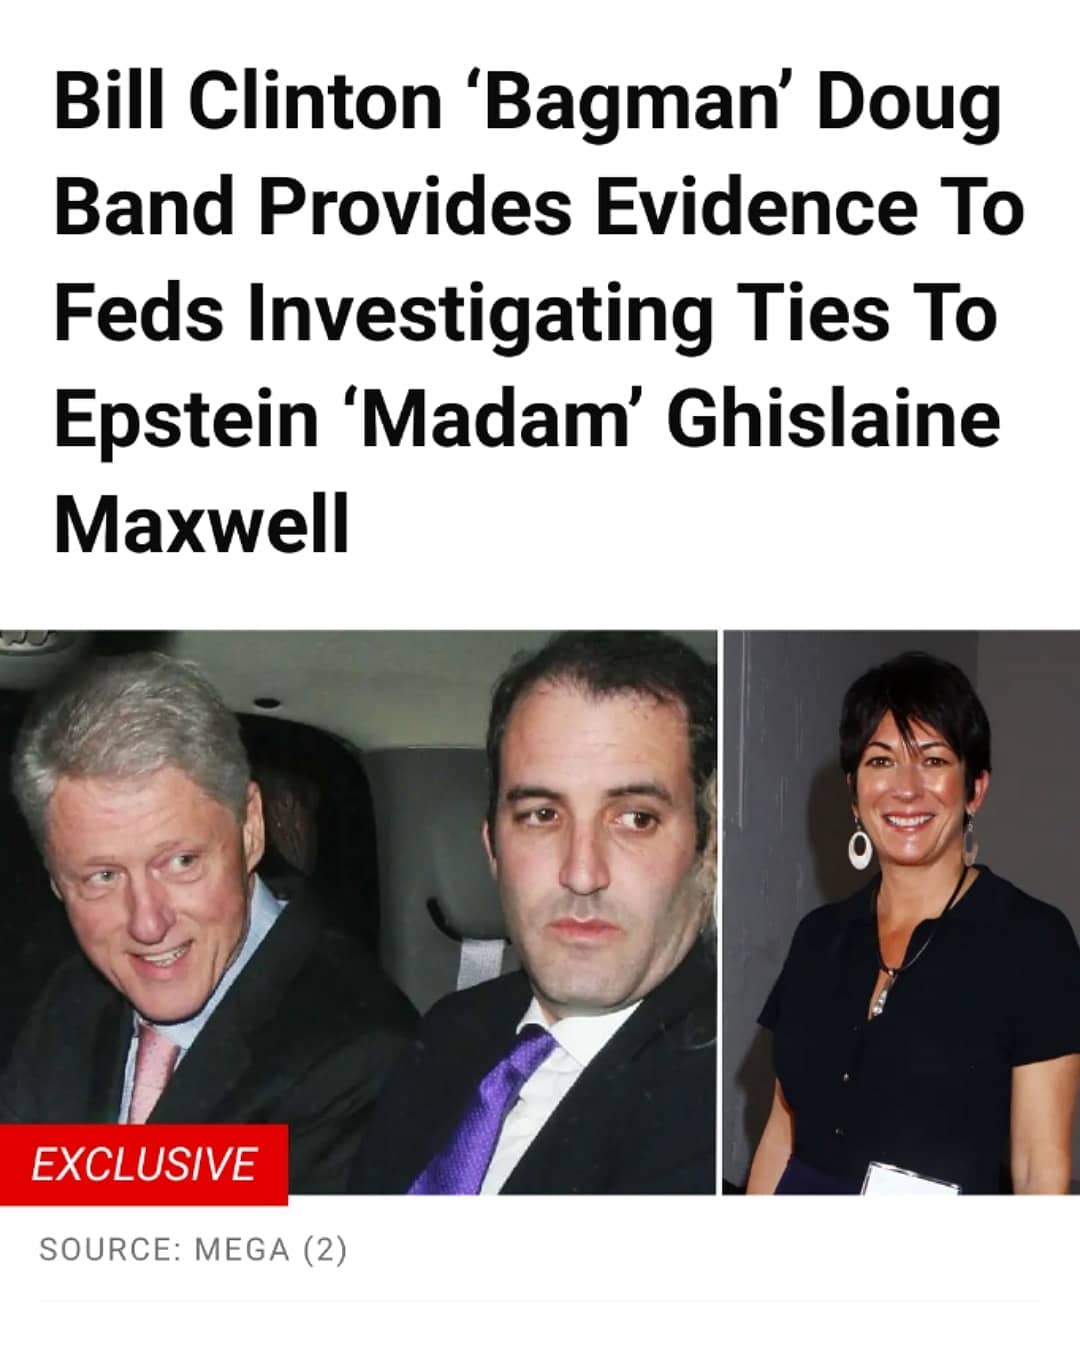 You are currently viewing Bill Clinton ‘Bagman’ Doug Band Provides Evidence To Feds Investigating Ties To Epstein ‘Madam’ Ghislaine Maxwell